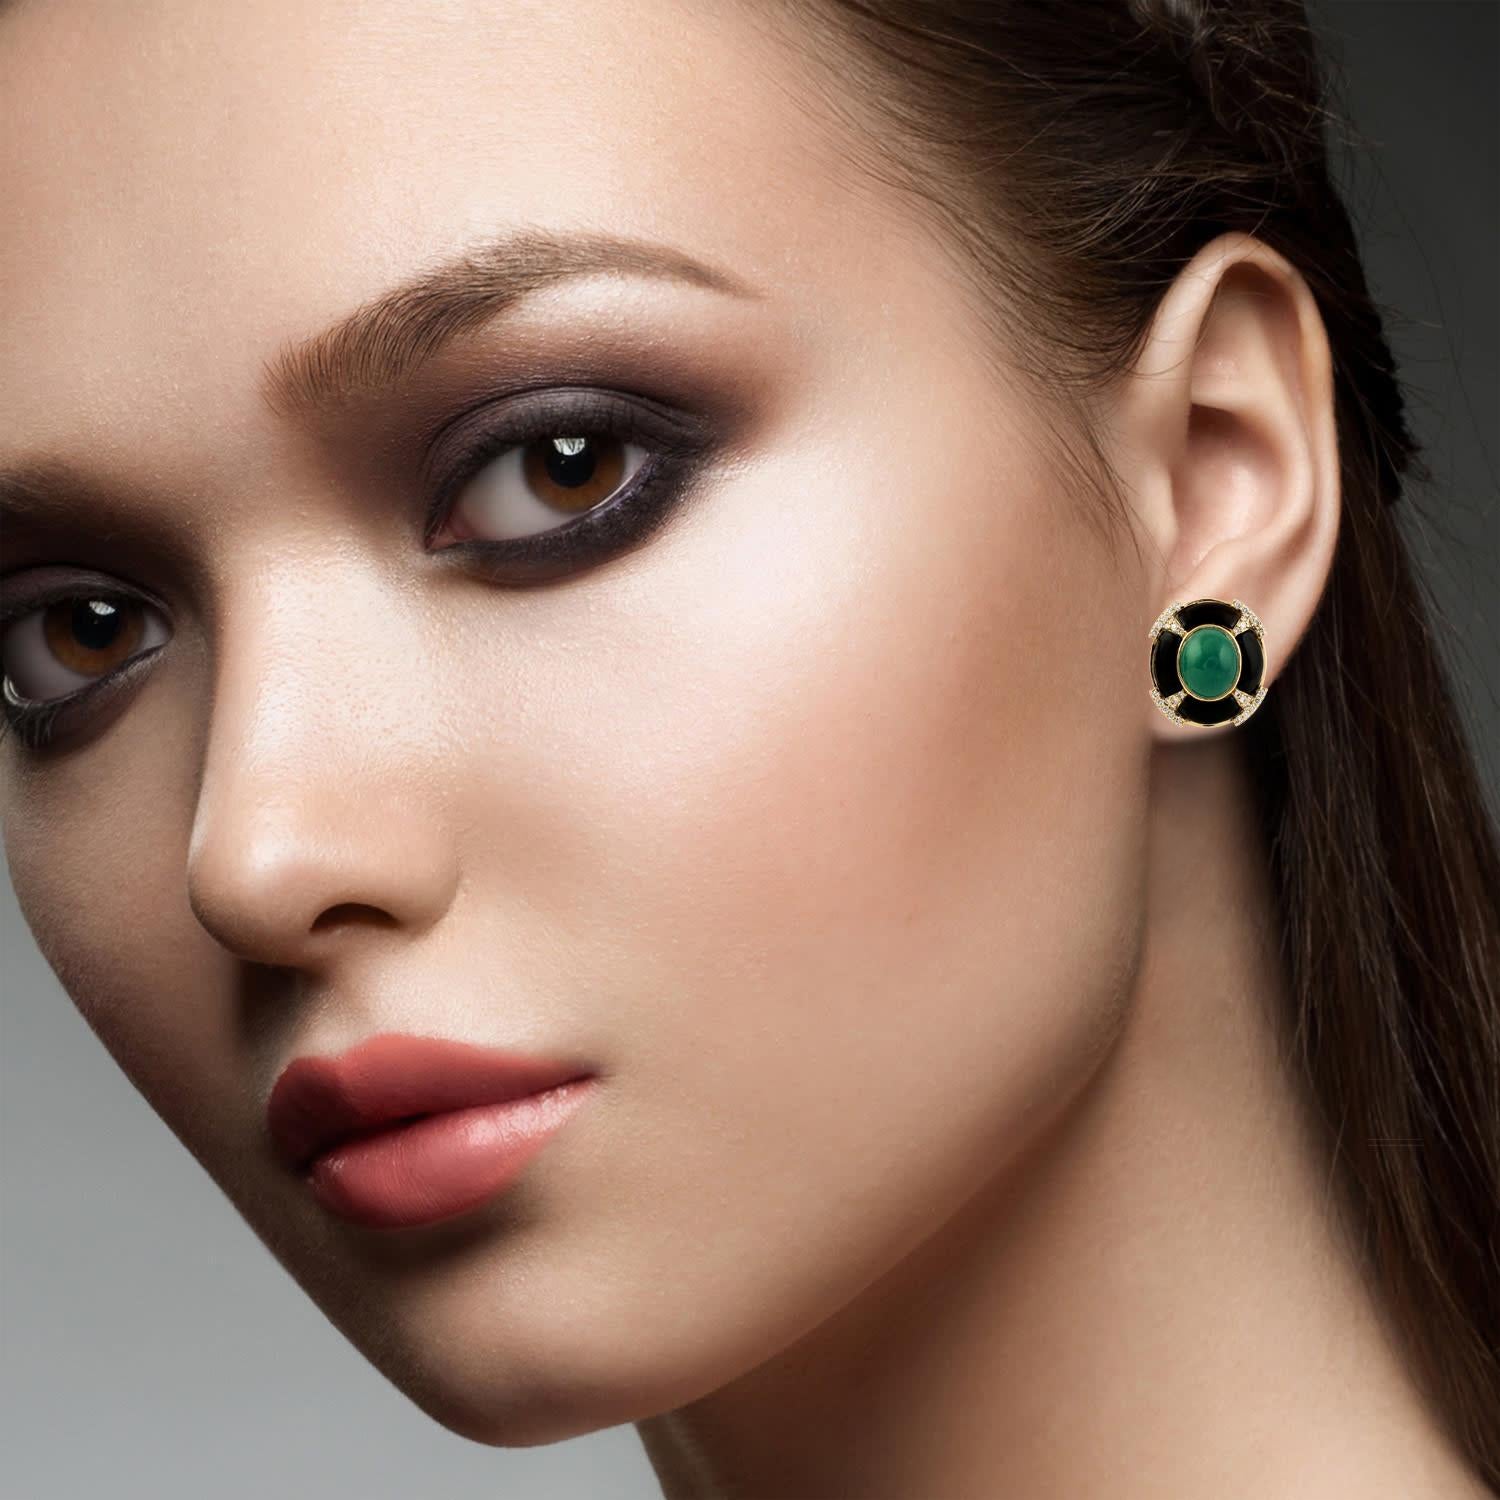 Handcrafted from 14-karat gold, these beautiful stud earrings are set with 6.97 carats emerald, 5.51 carats onyx and .43 carats of sparkling diamonds.

FOLLOW  MEGHNA JEWELS storefront to view the latest collection & exclusive pieces.  Meghna Jewels